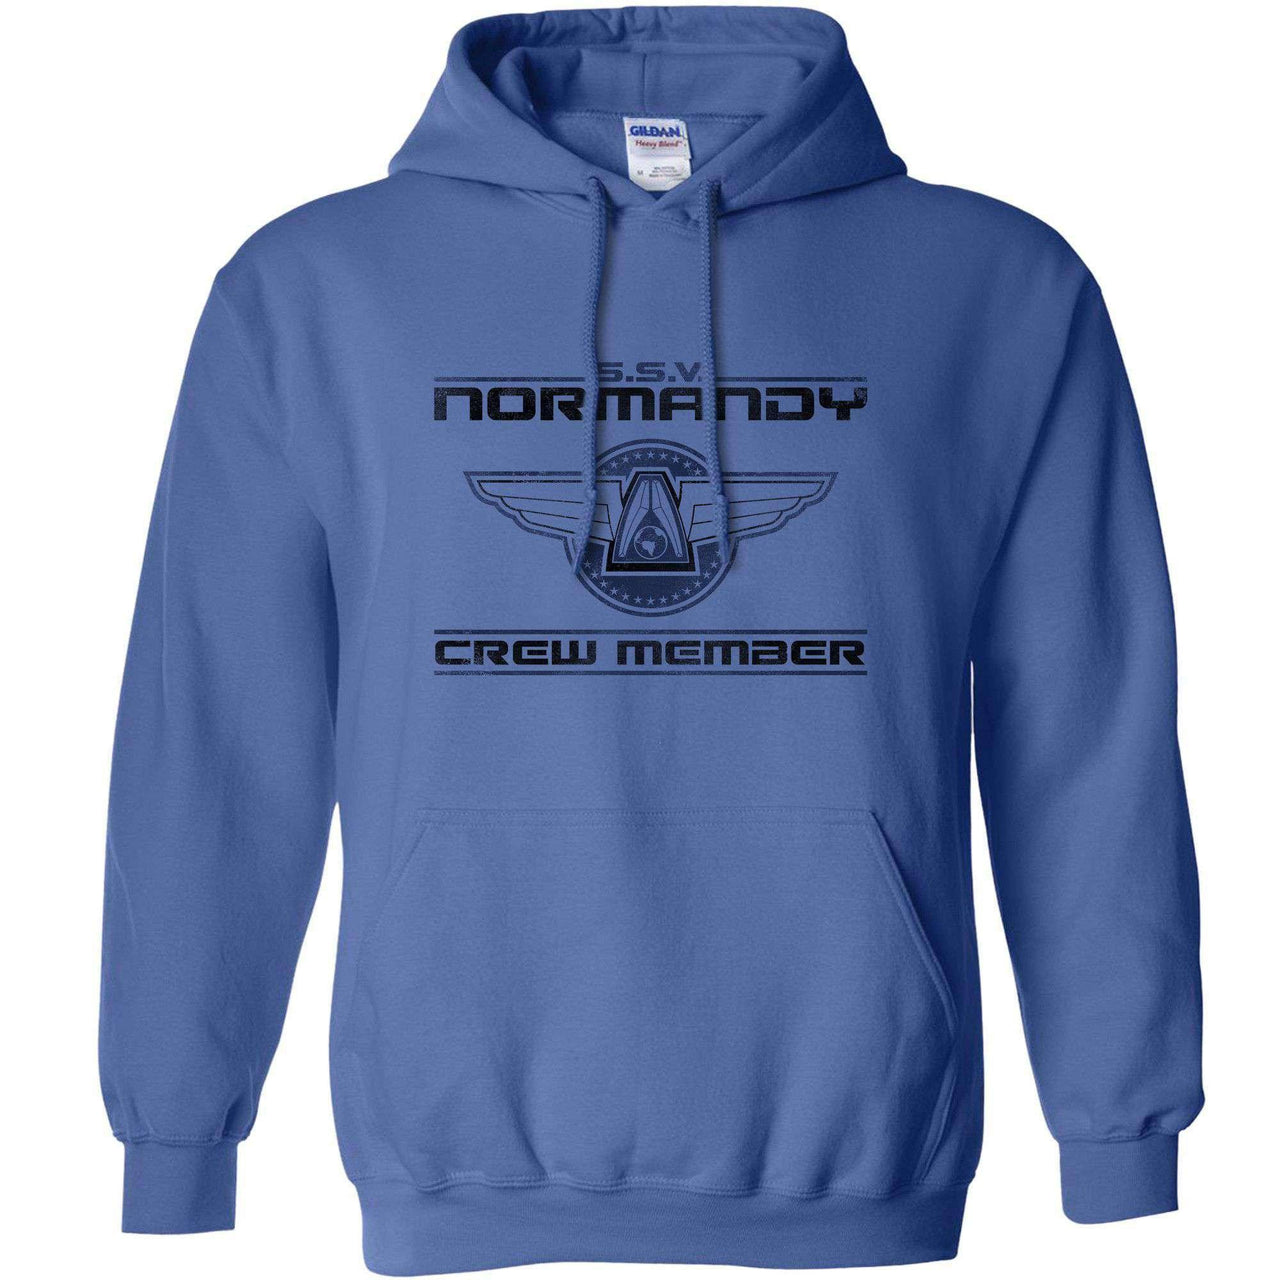 SSV Normandy Hoodie For Men and Women 8Ball